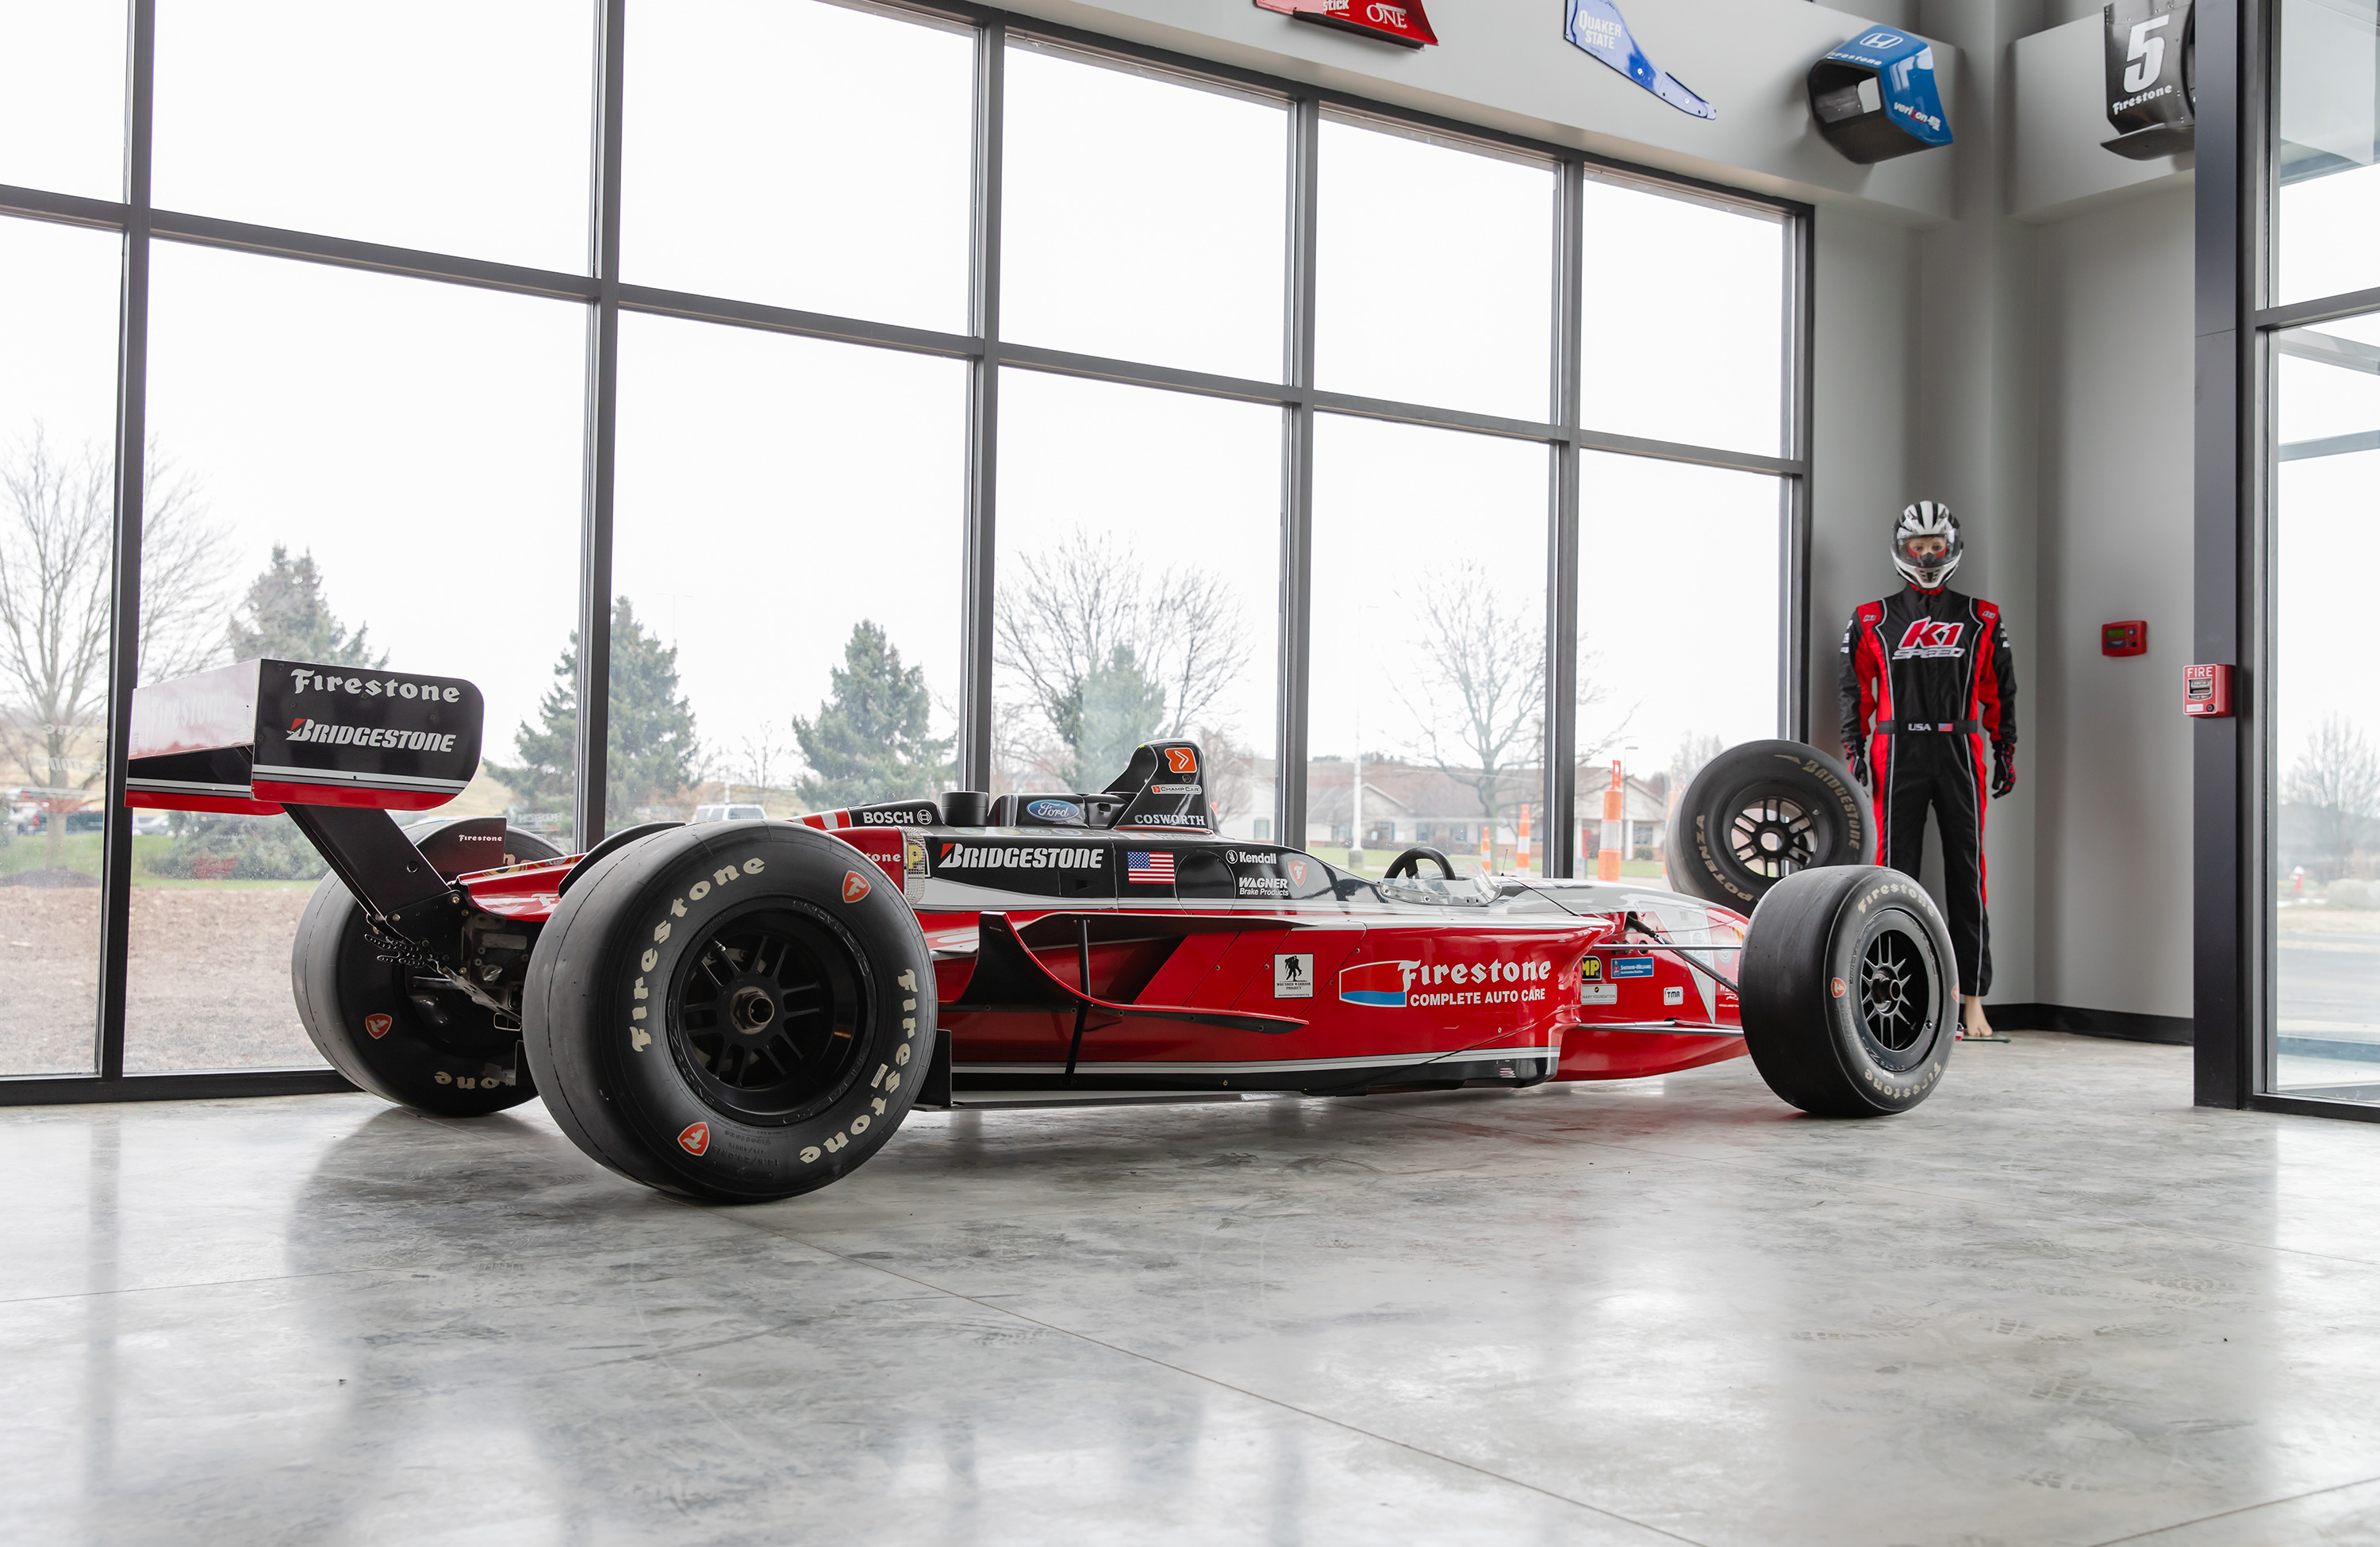 An authentic Champ Car sits on display in the lobby at K1 Speed Canton